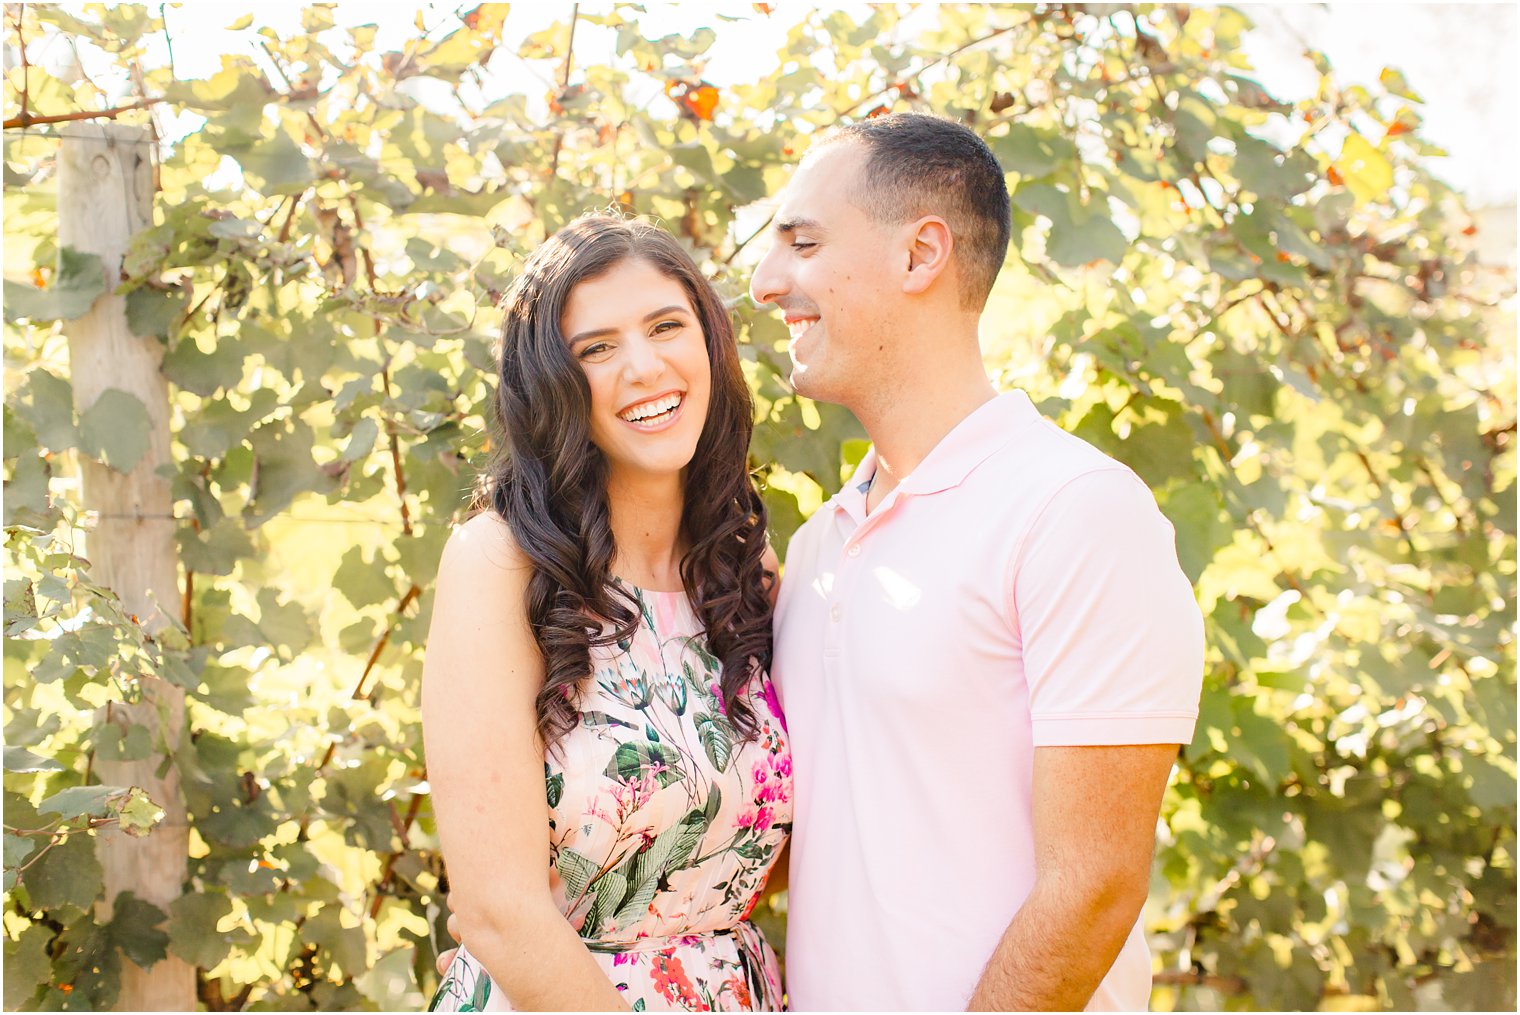 Natural posing during engagement session at Cape May Winery and Vineyard